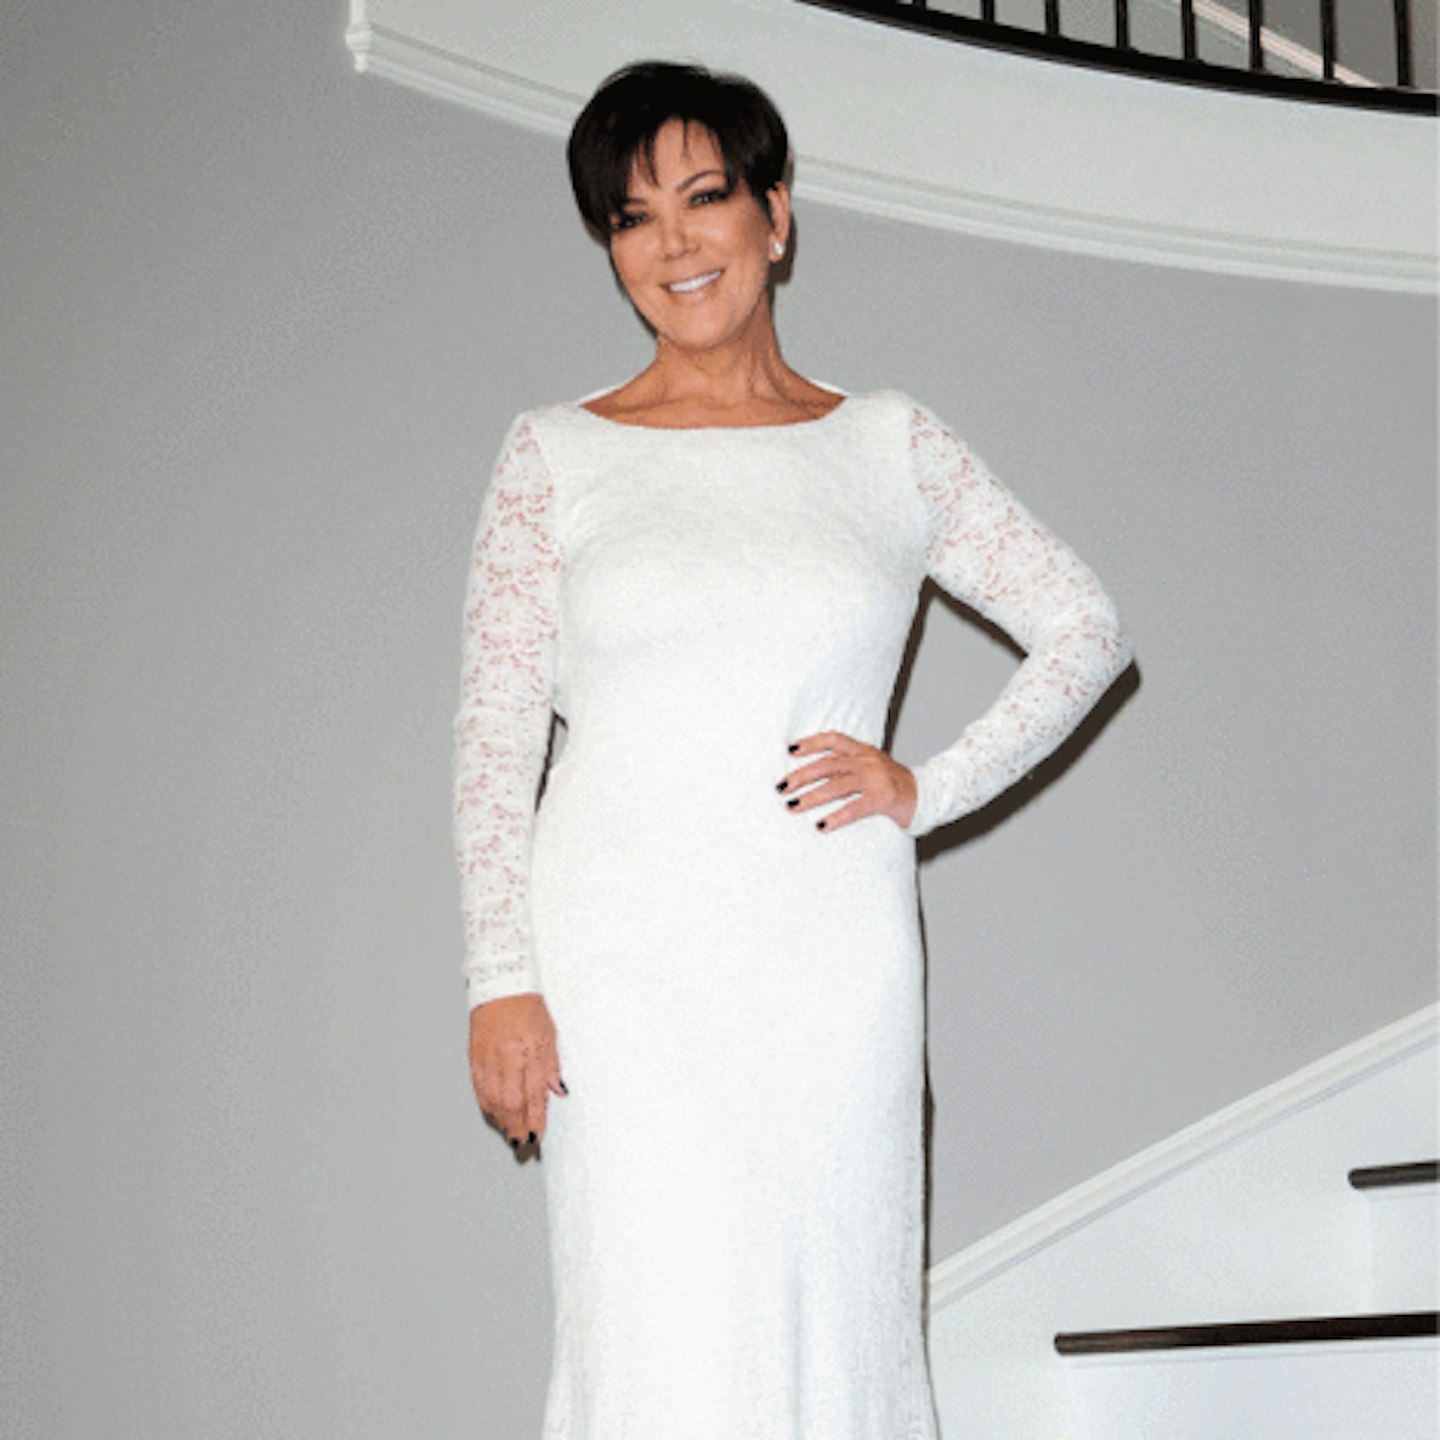 Kris Jenner's sister has claimed she is 'obessed with money'